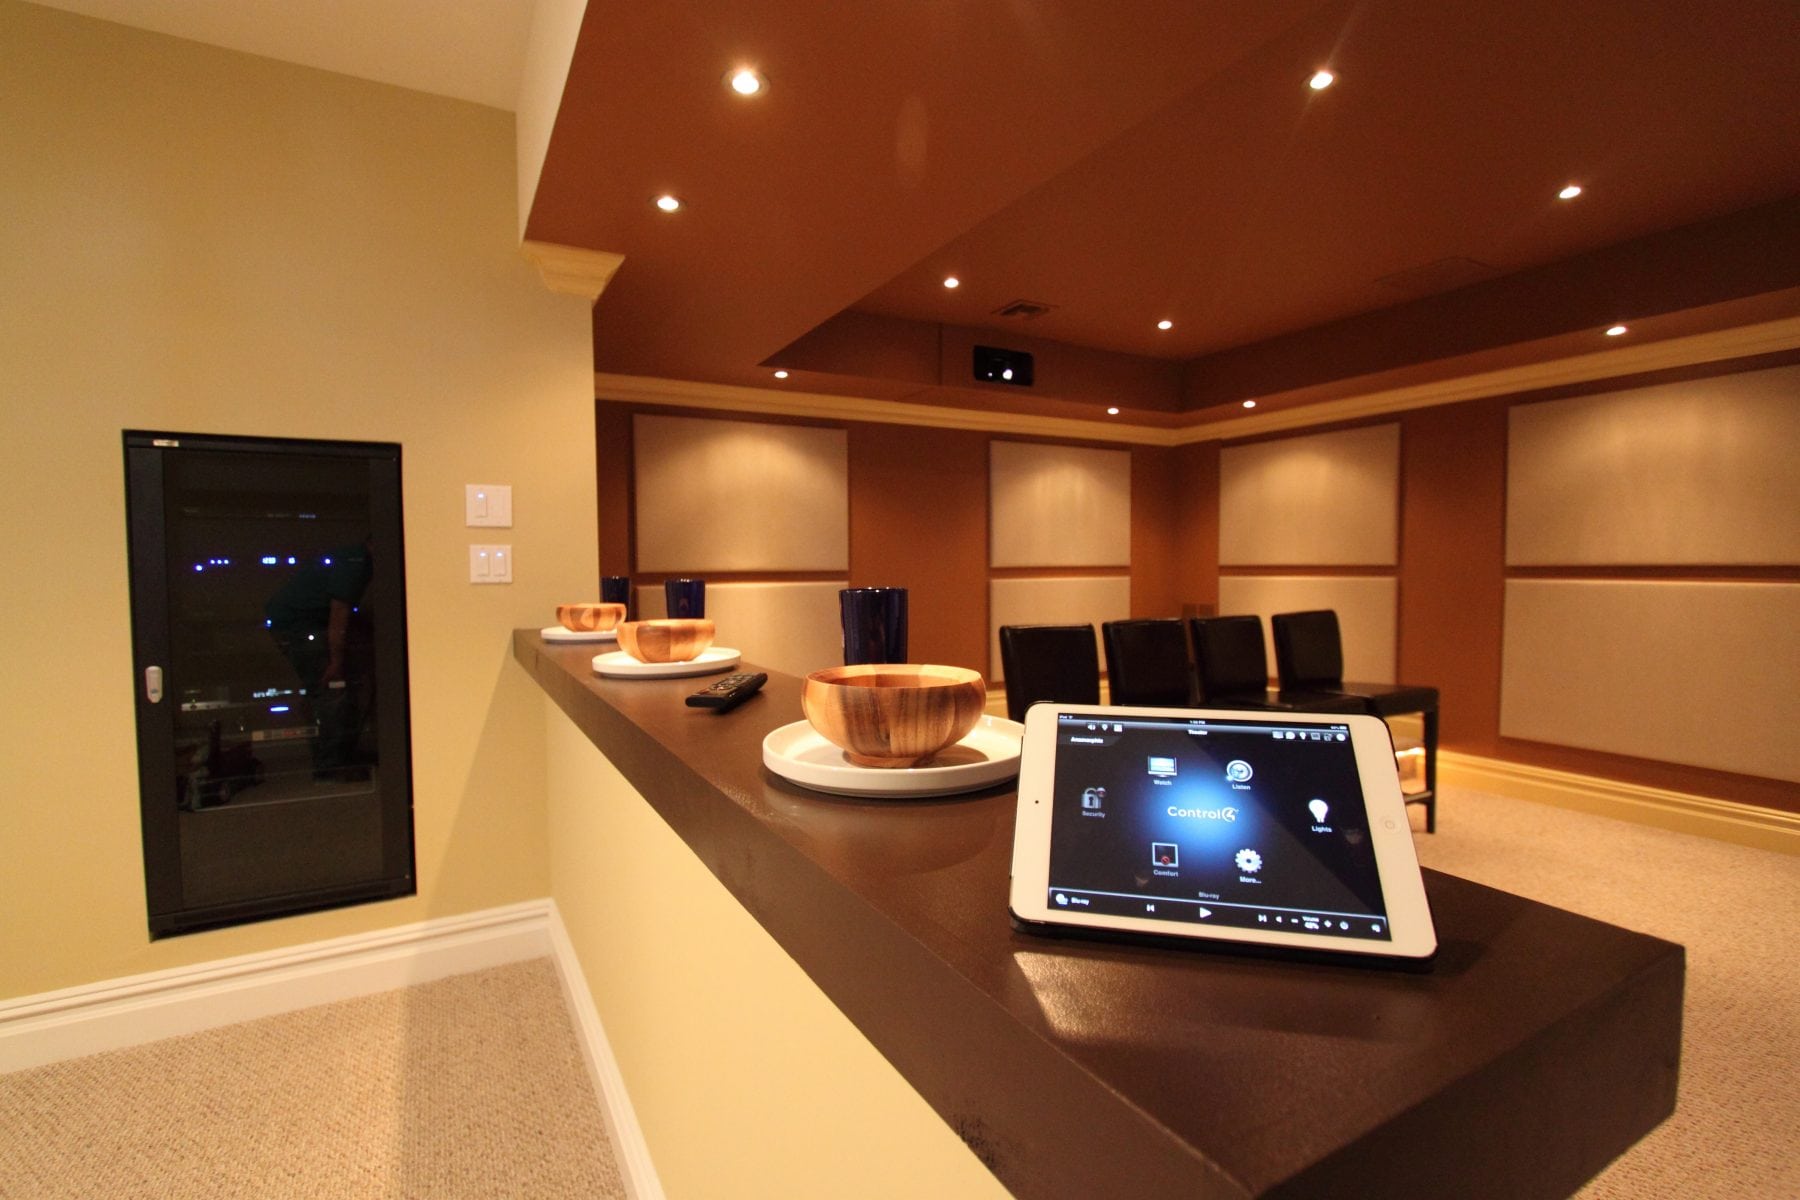 Let's Get Started with Home Automation Lighting ...